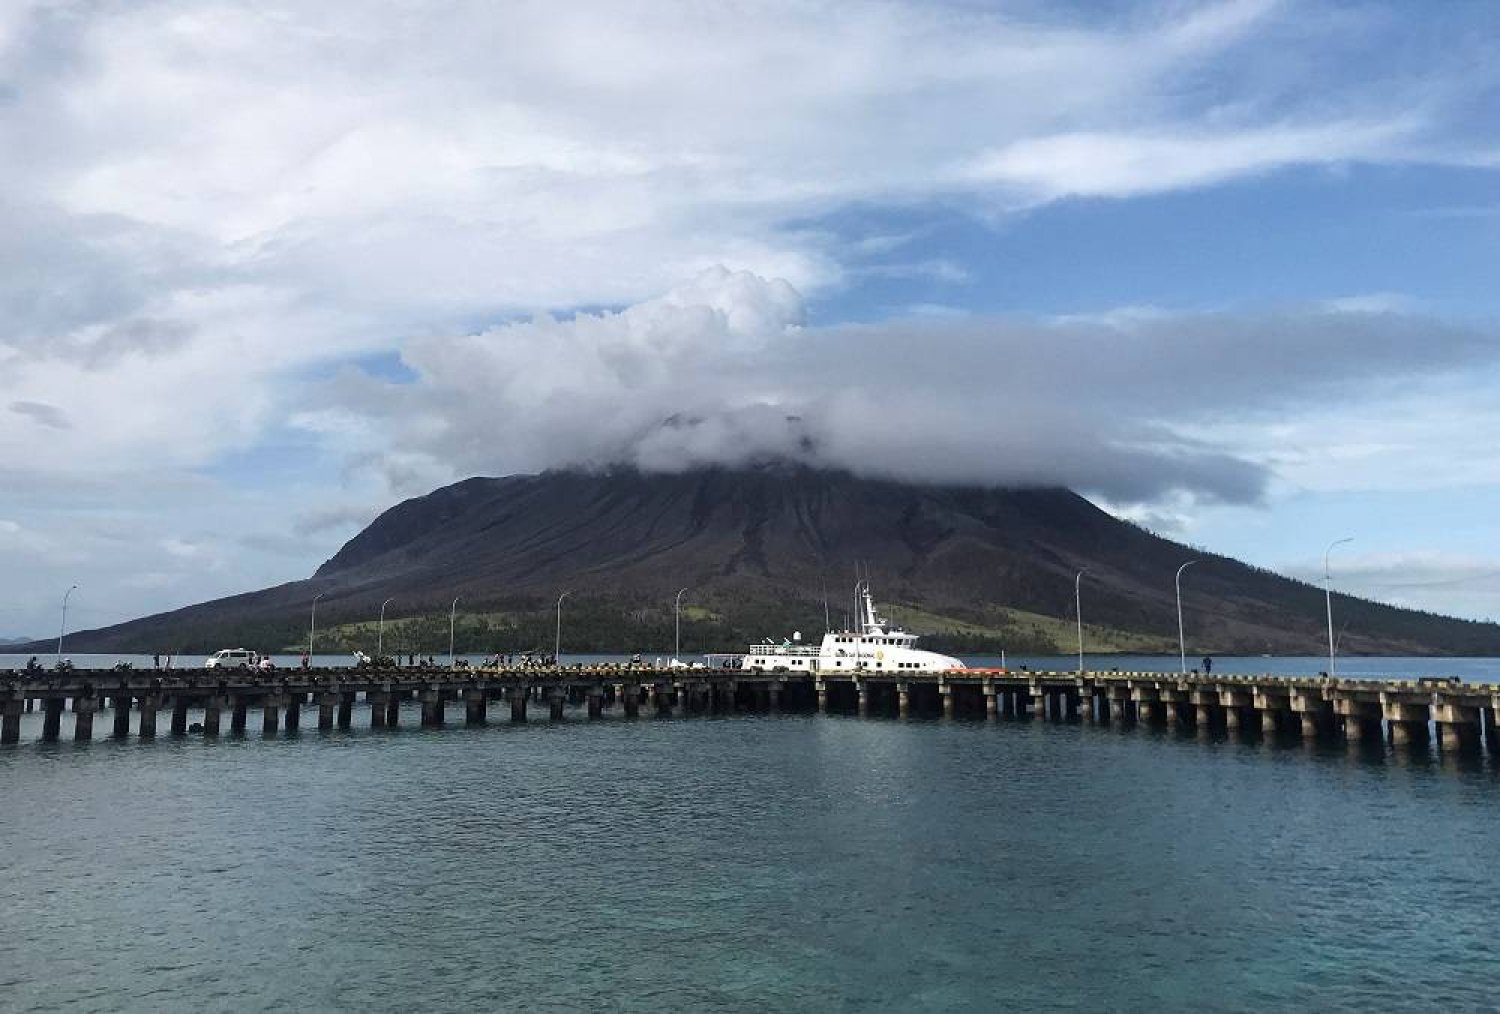 Search and rescue boat is docked on the port of Tagulandang as Mount Ruang volcano spews volcanic ash in Sitaro Islands Regency, North Sulawesi province, Indonesia, April 19, 2024. (Reuters)